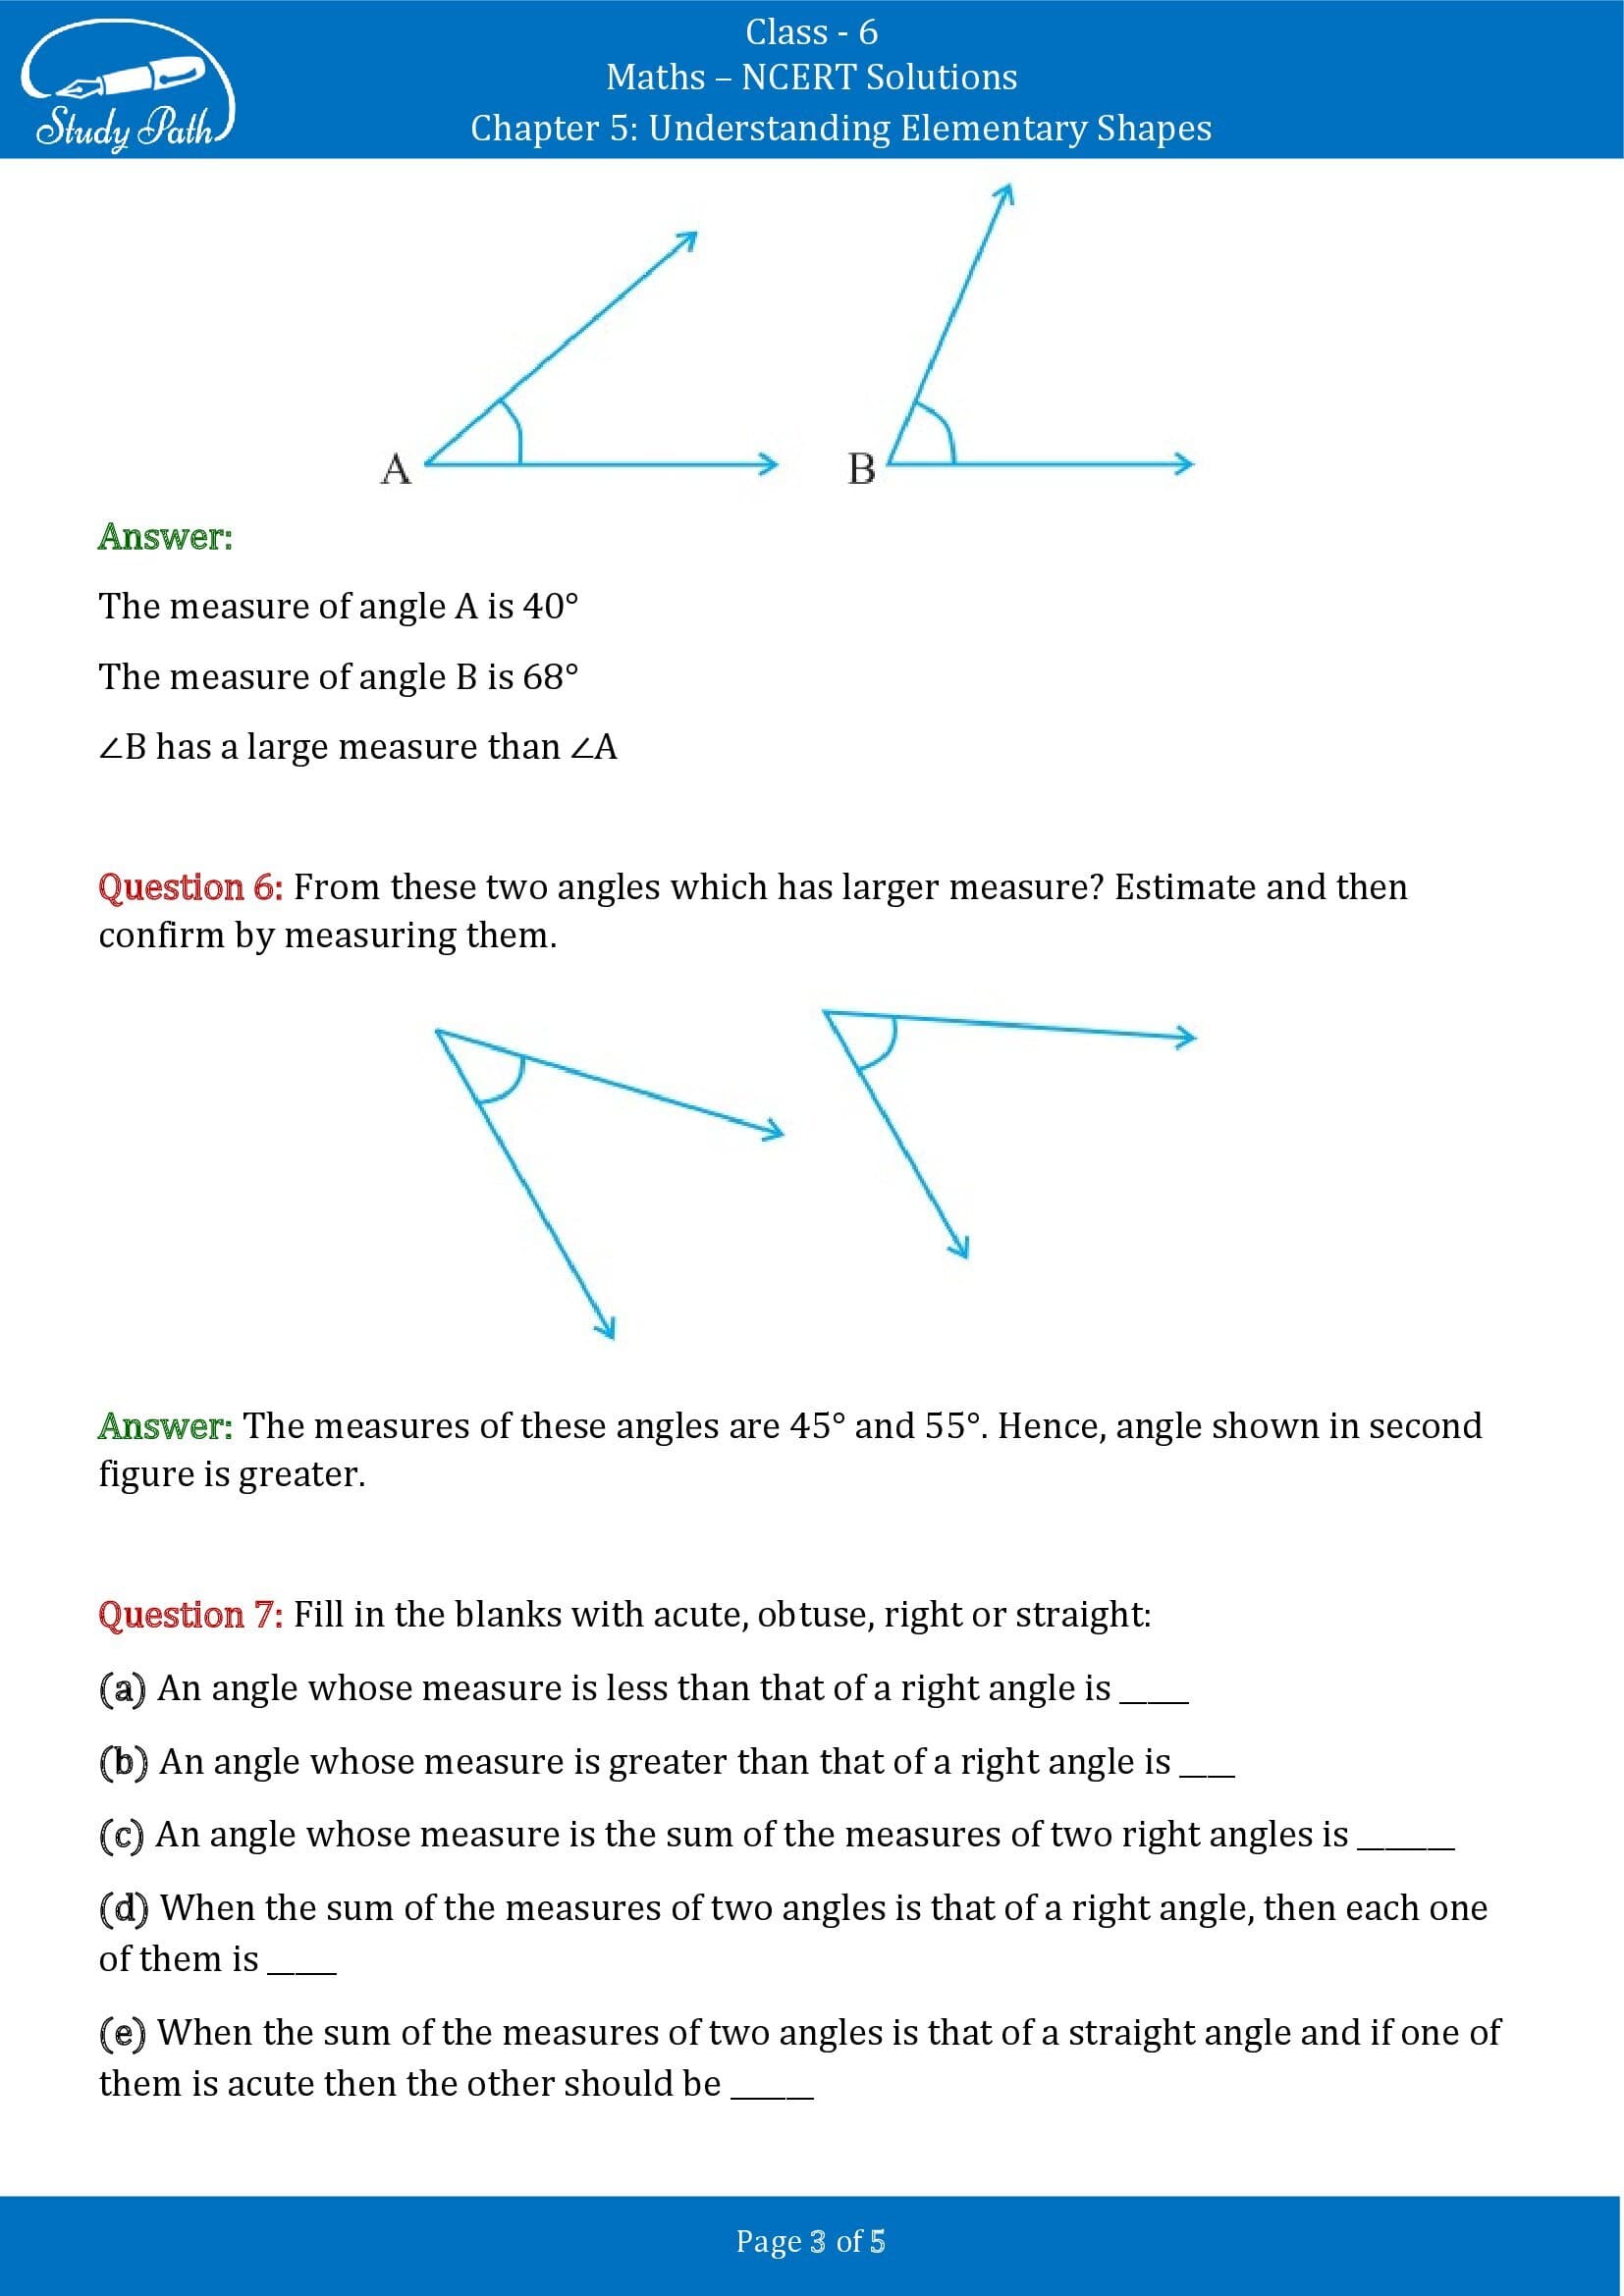 NCERT Solutions for Class 6 Maths Chapter 5 Understanding Elementary Shapes Exercise 5.4 0003